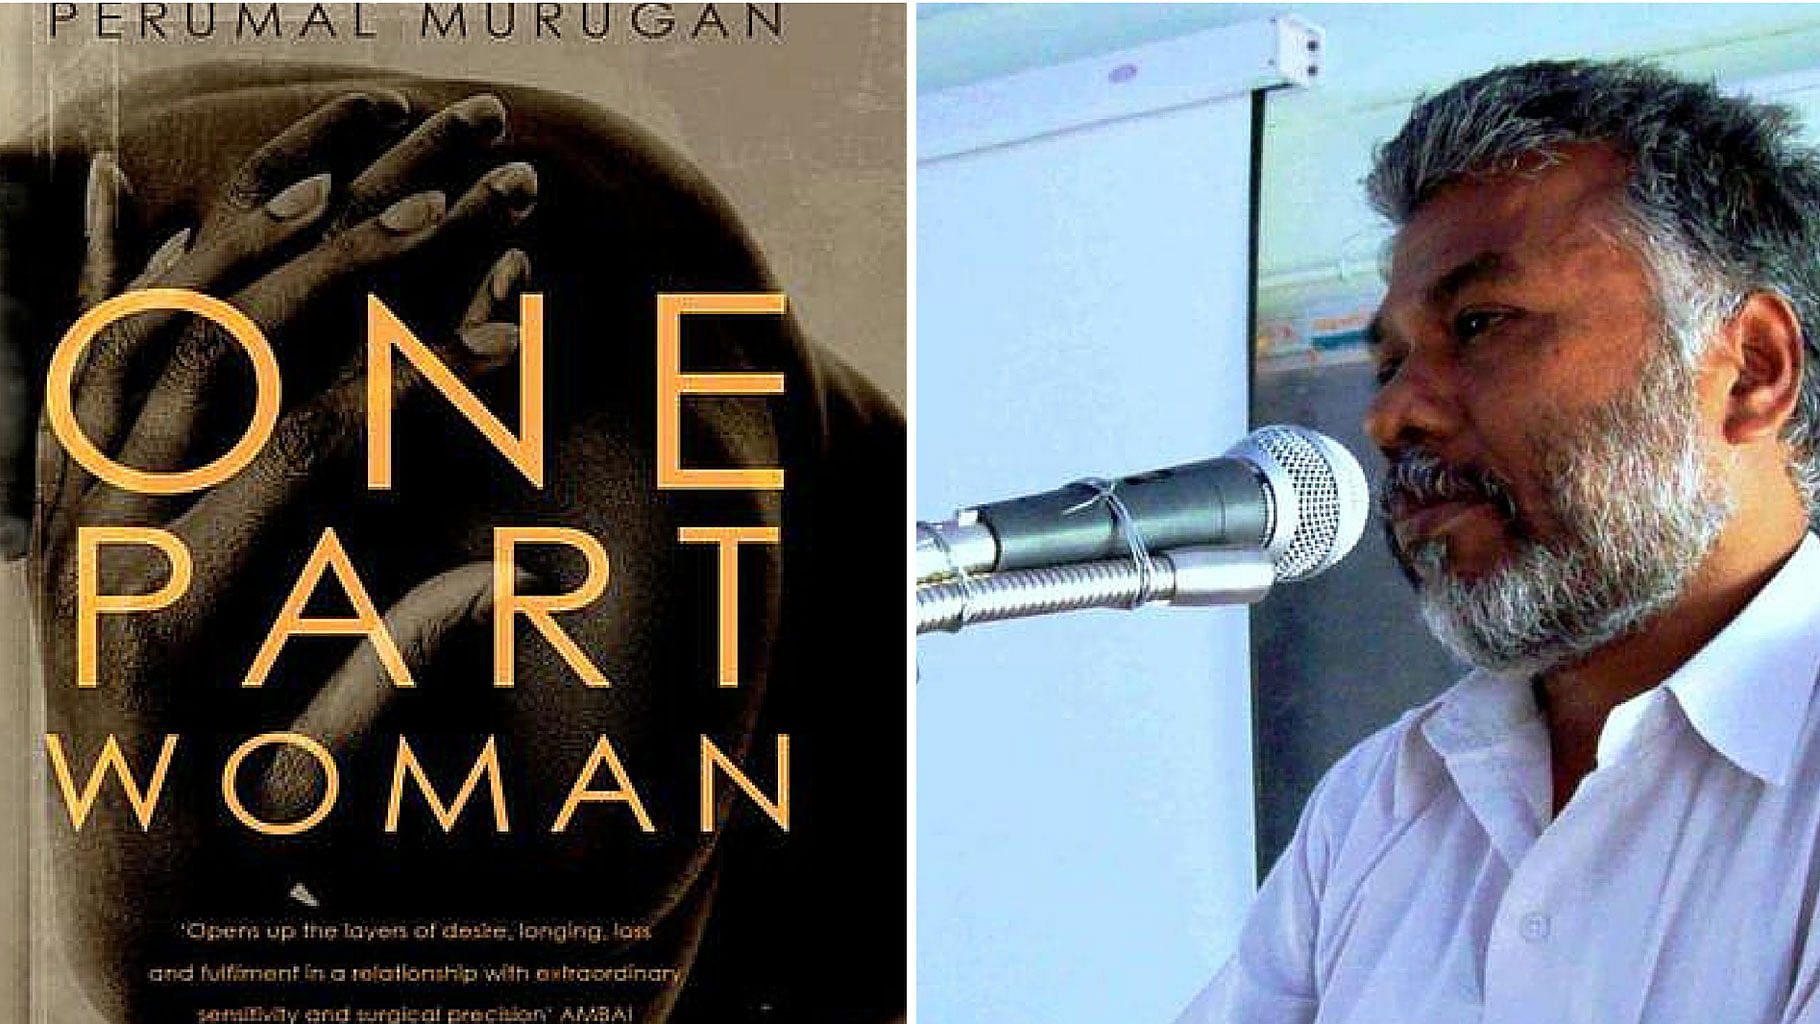 The author Perumal Murugan should not be under fear, the court said. (Photo: Altered by The Quint)